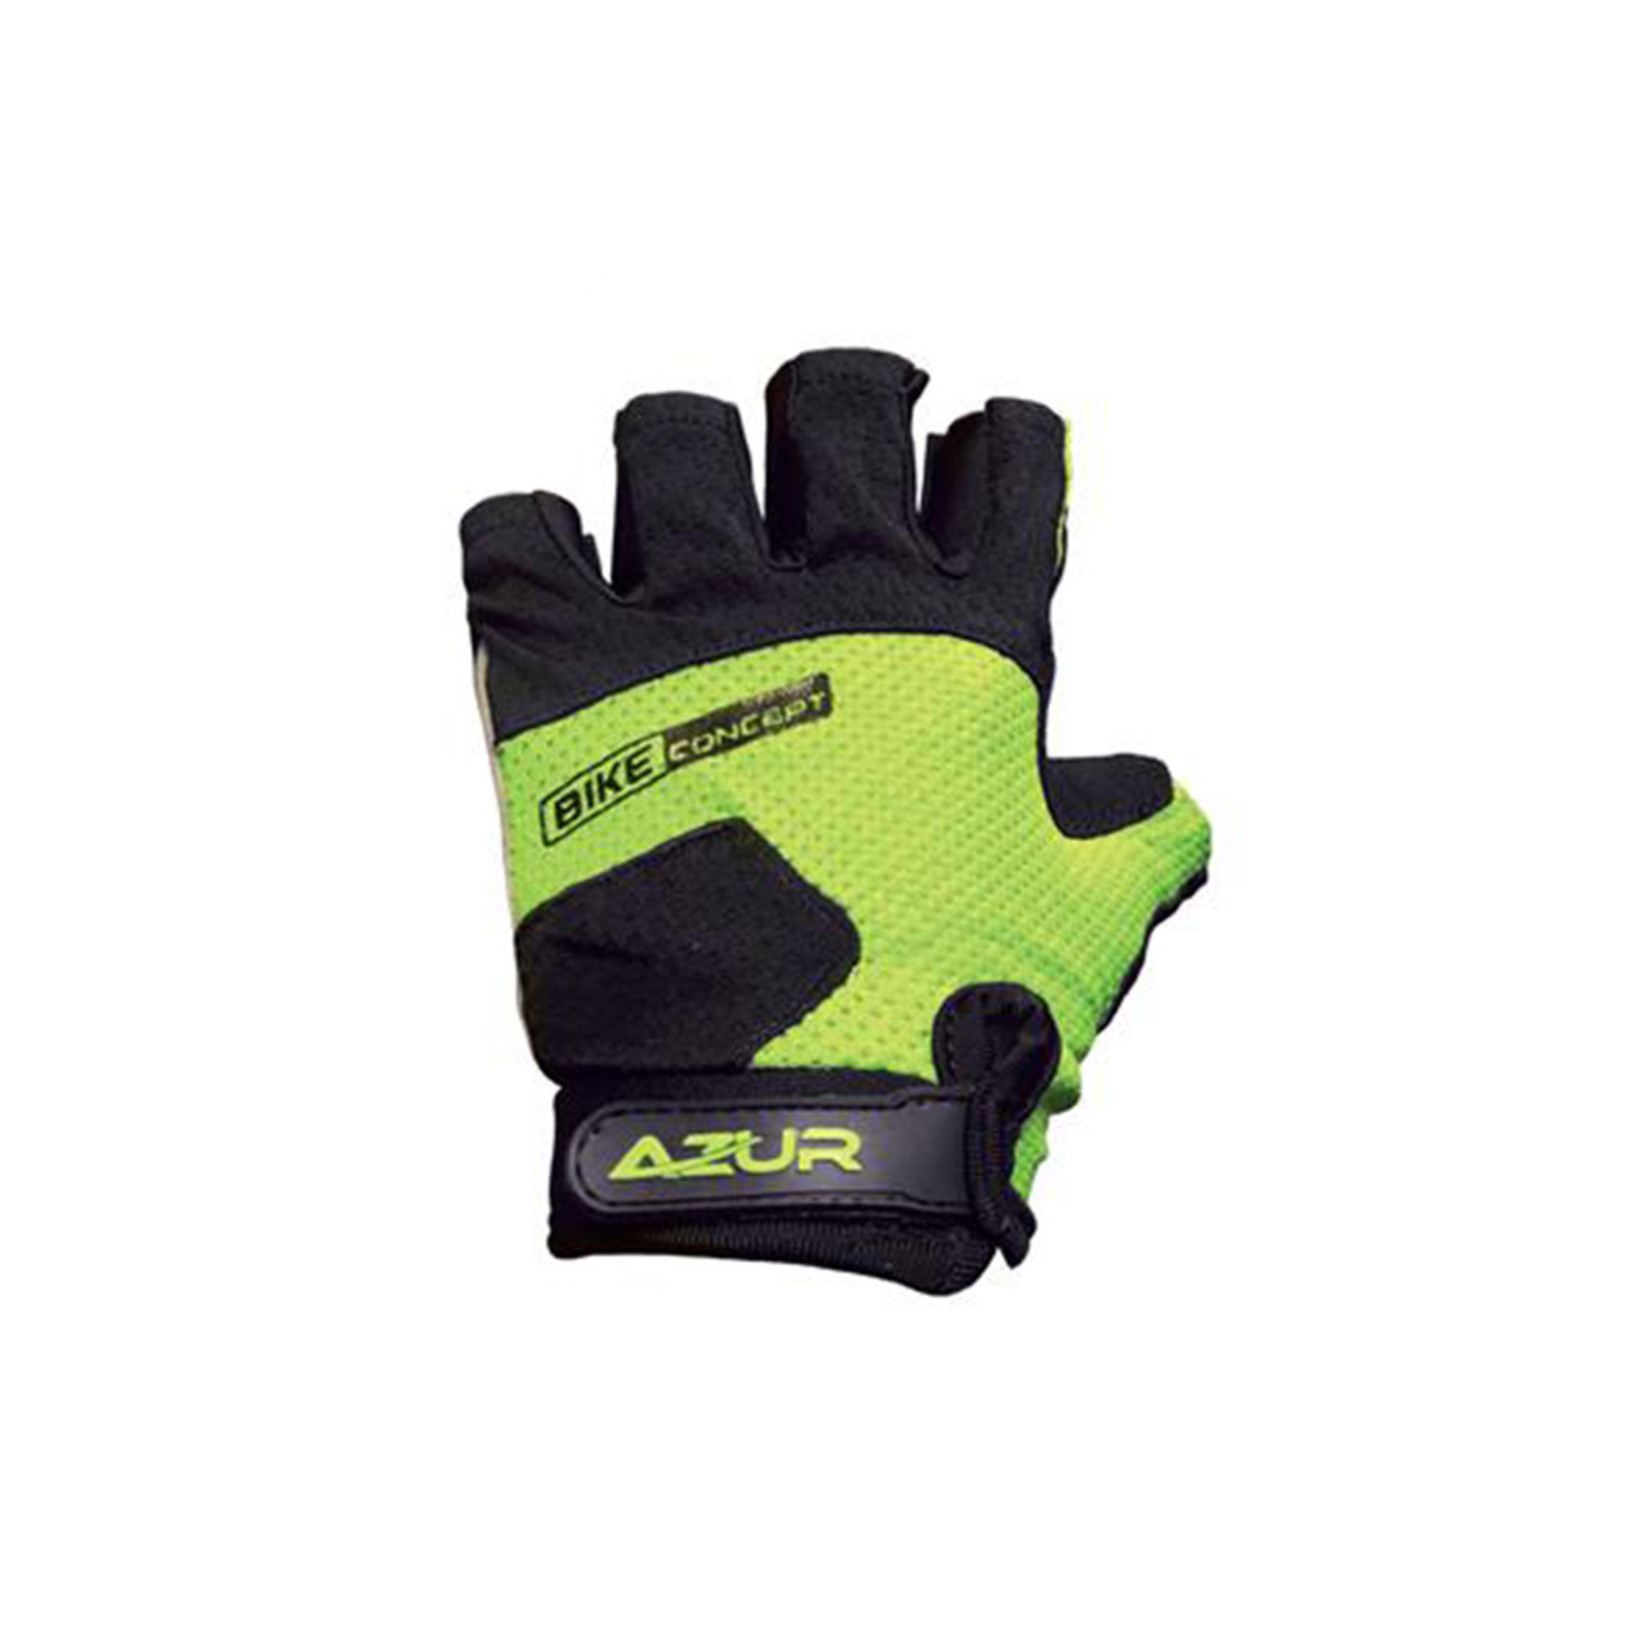 Azur Azur Bike/Bicycle Gloves - K6 Series Synthetic Gel Padded Palm - Yellow - Size 5